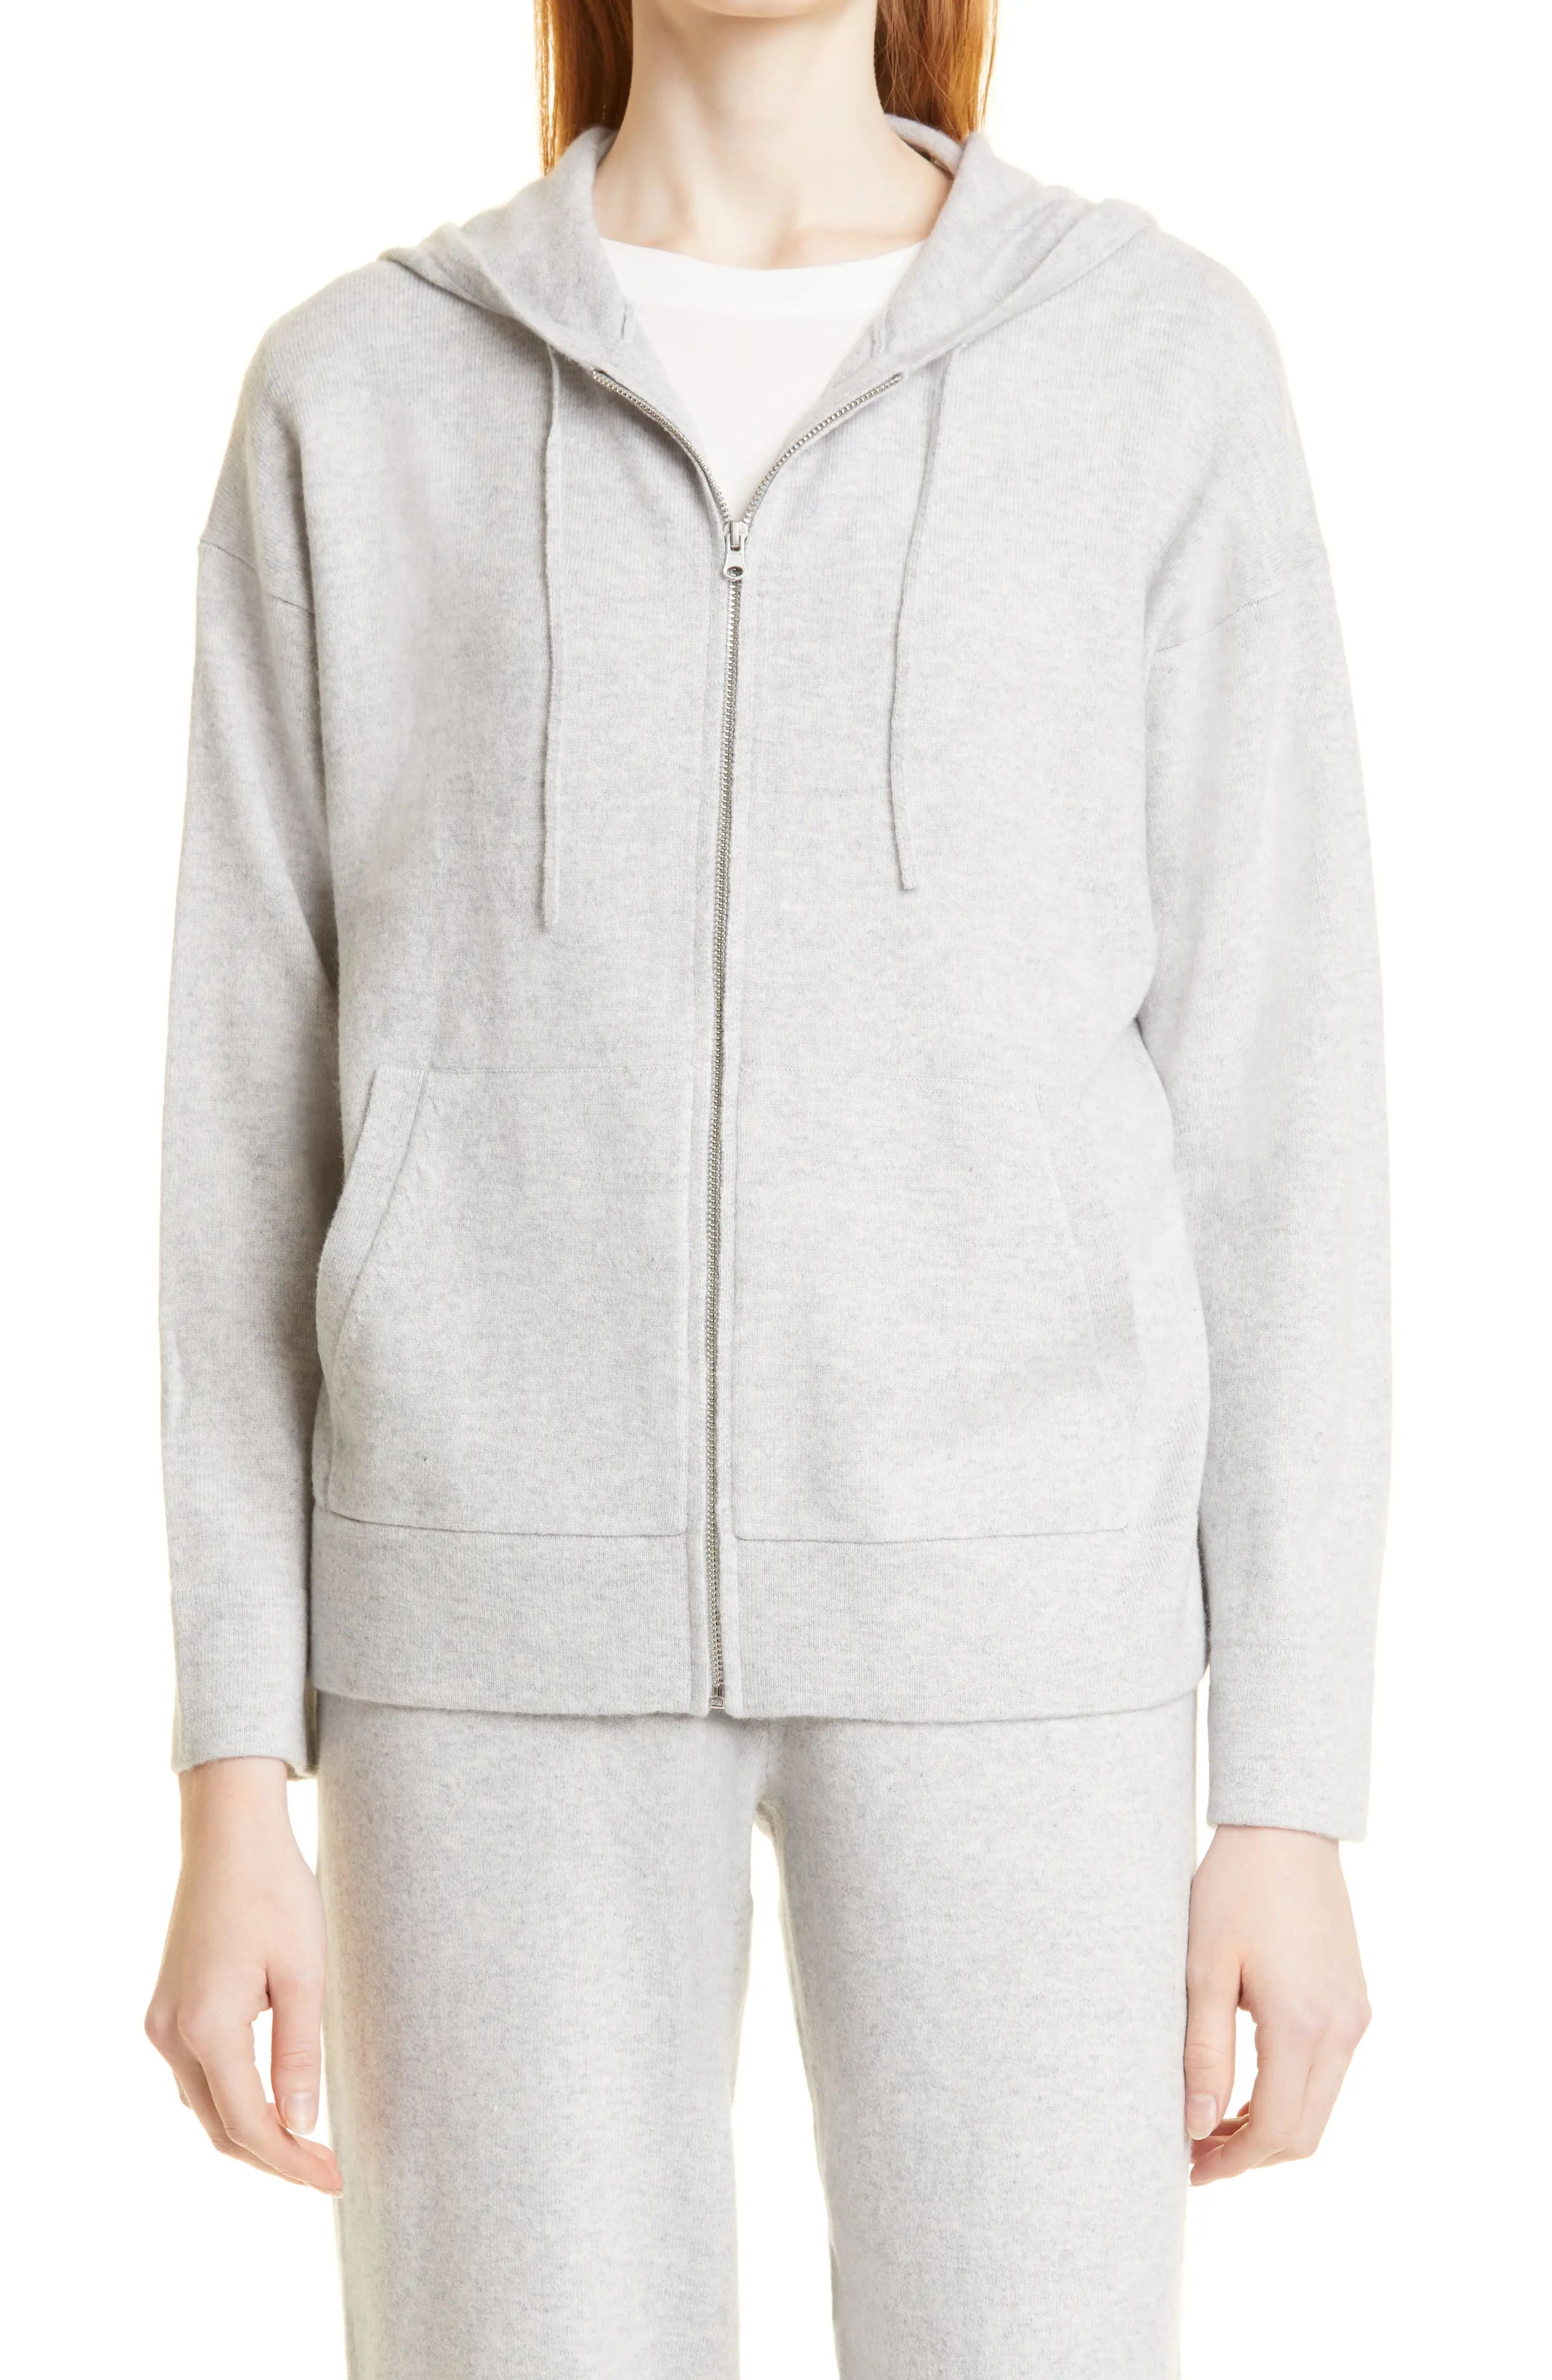 Vince Wool & Cashmere Zip-Up Hoodie in H Grey at Nordstrom, Size Medium | Nordstrom